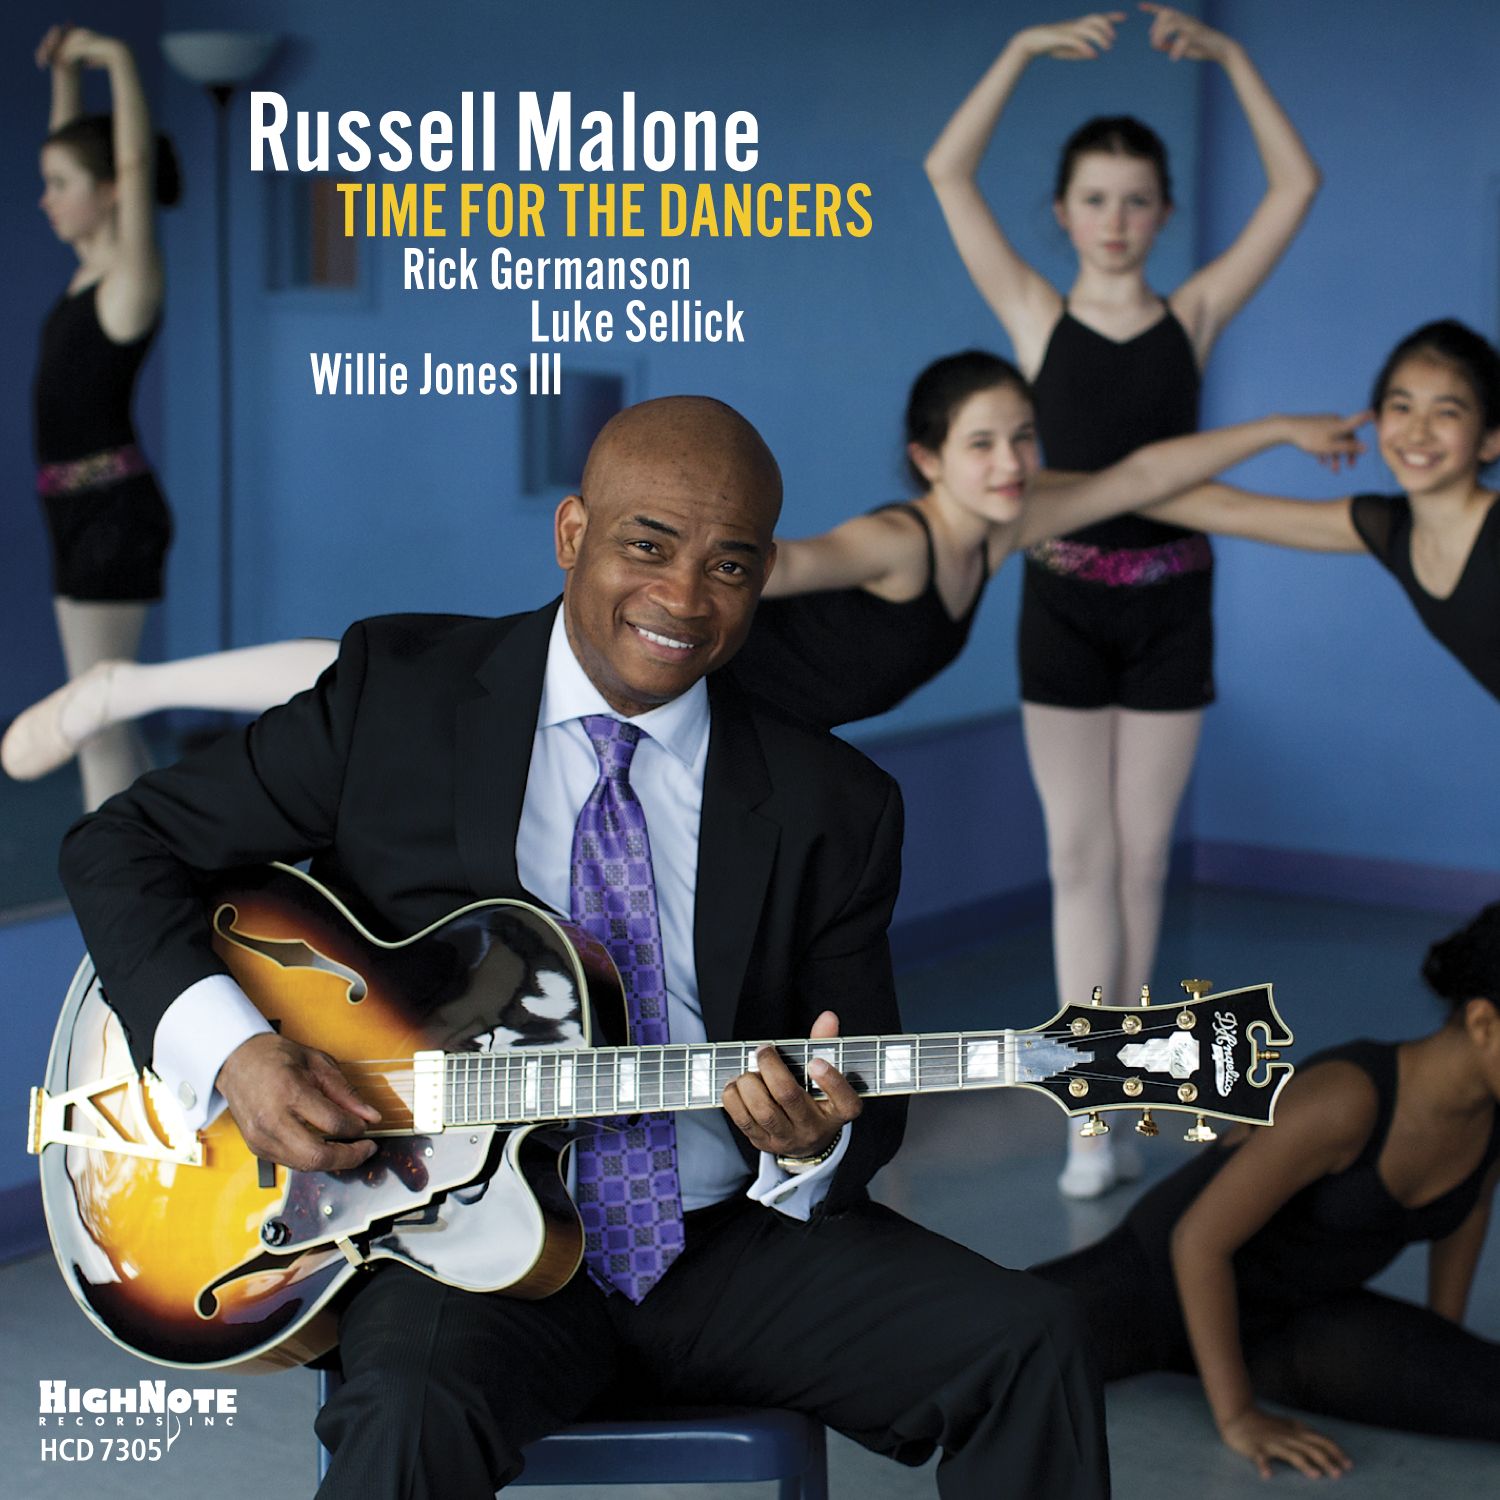 Russell Malone – Time For The Dancers (2017) [HDTracks FLAC 24bit/96kHz]